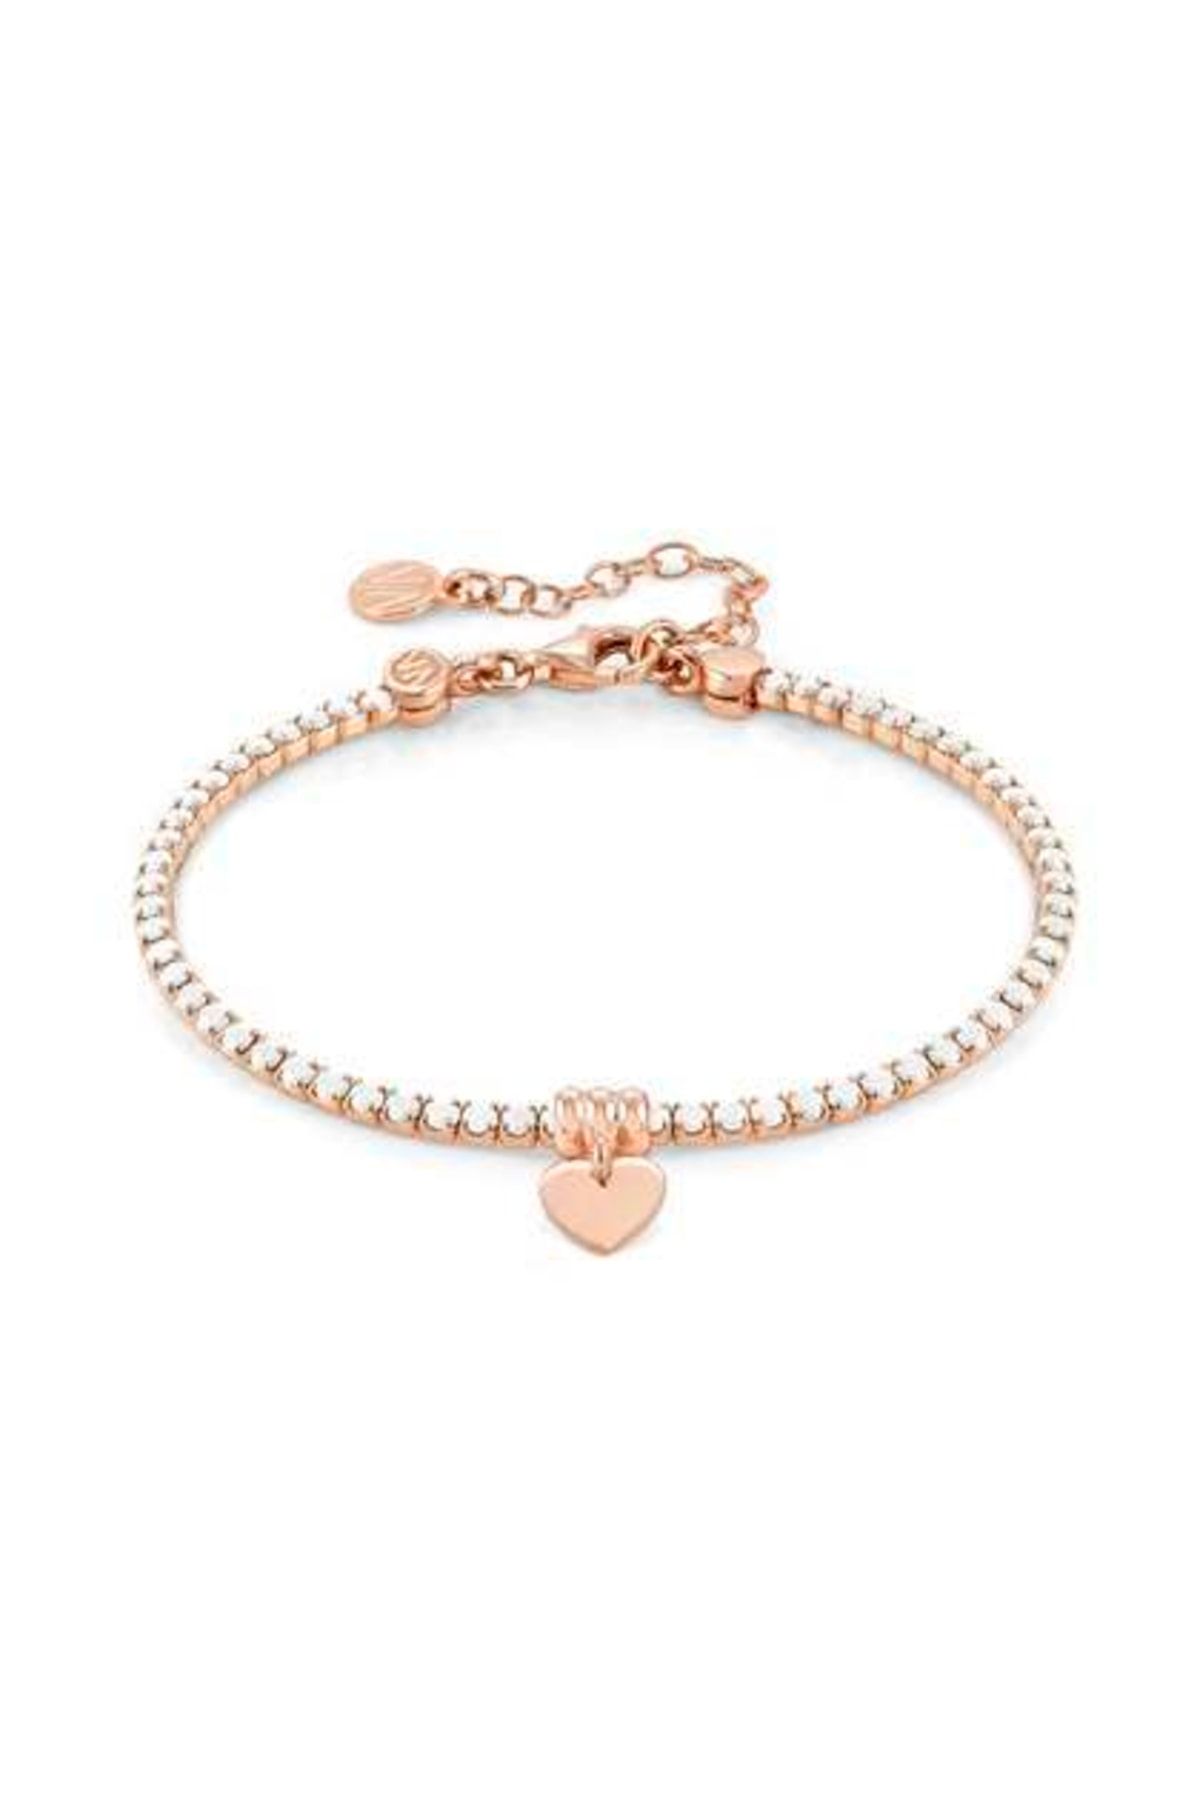 NOMİNATİON Chıc & Charm Bracelet Ed, Colors In 925 Silver And Cz Rosegold